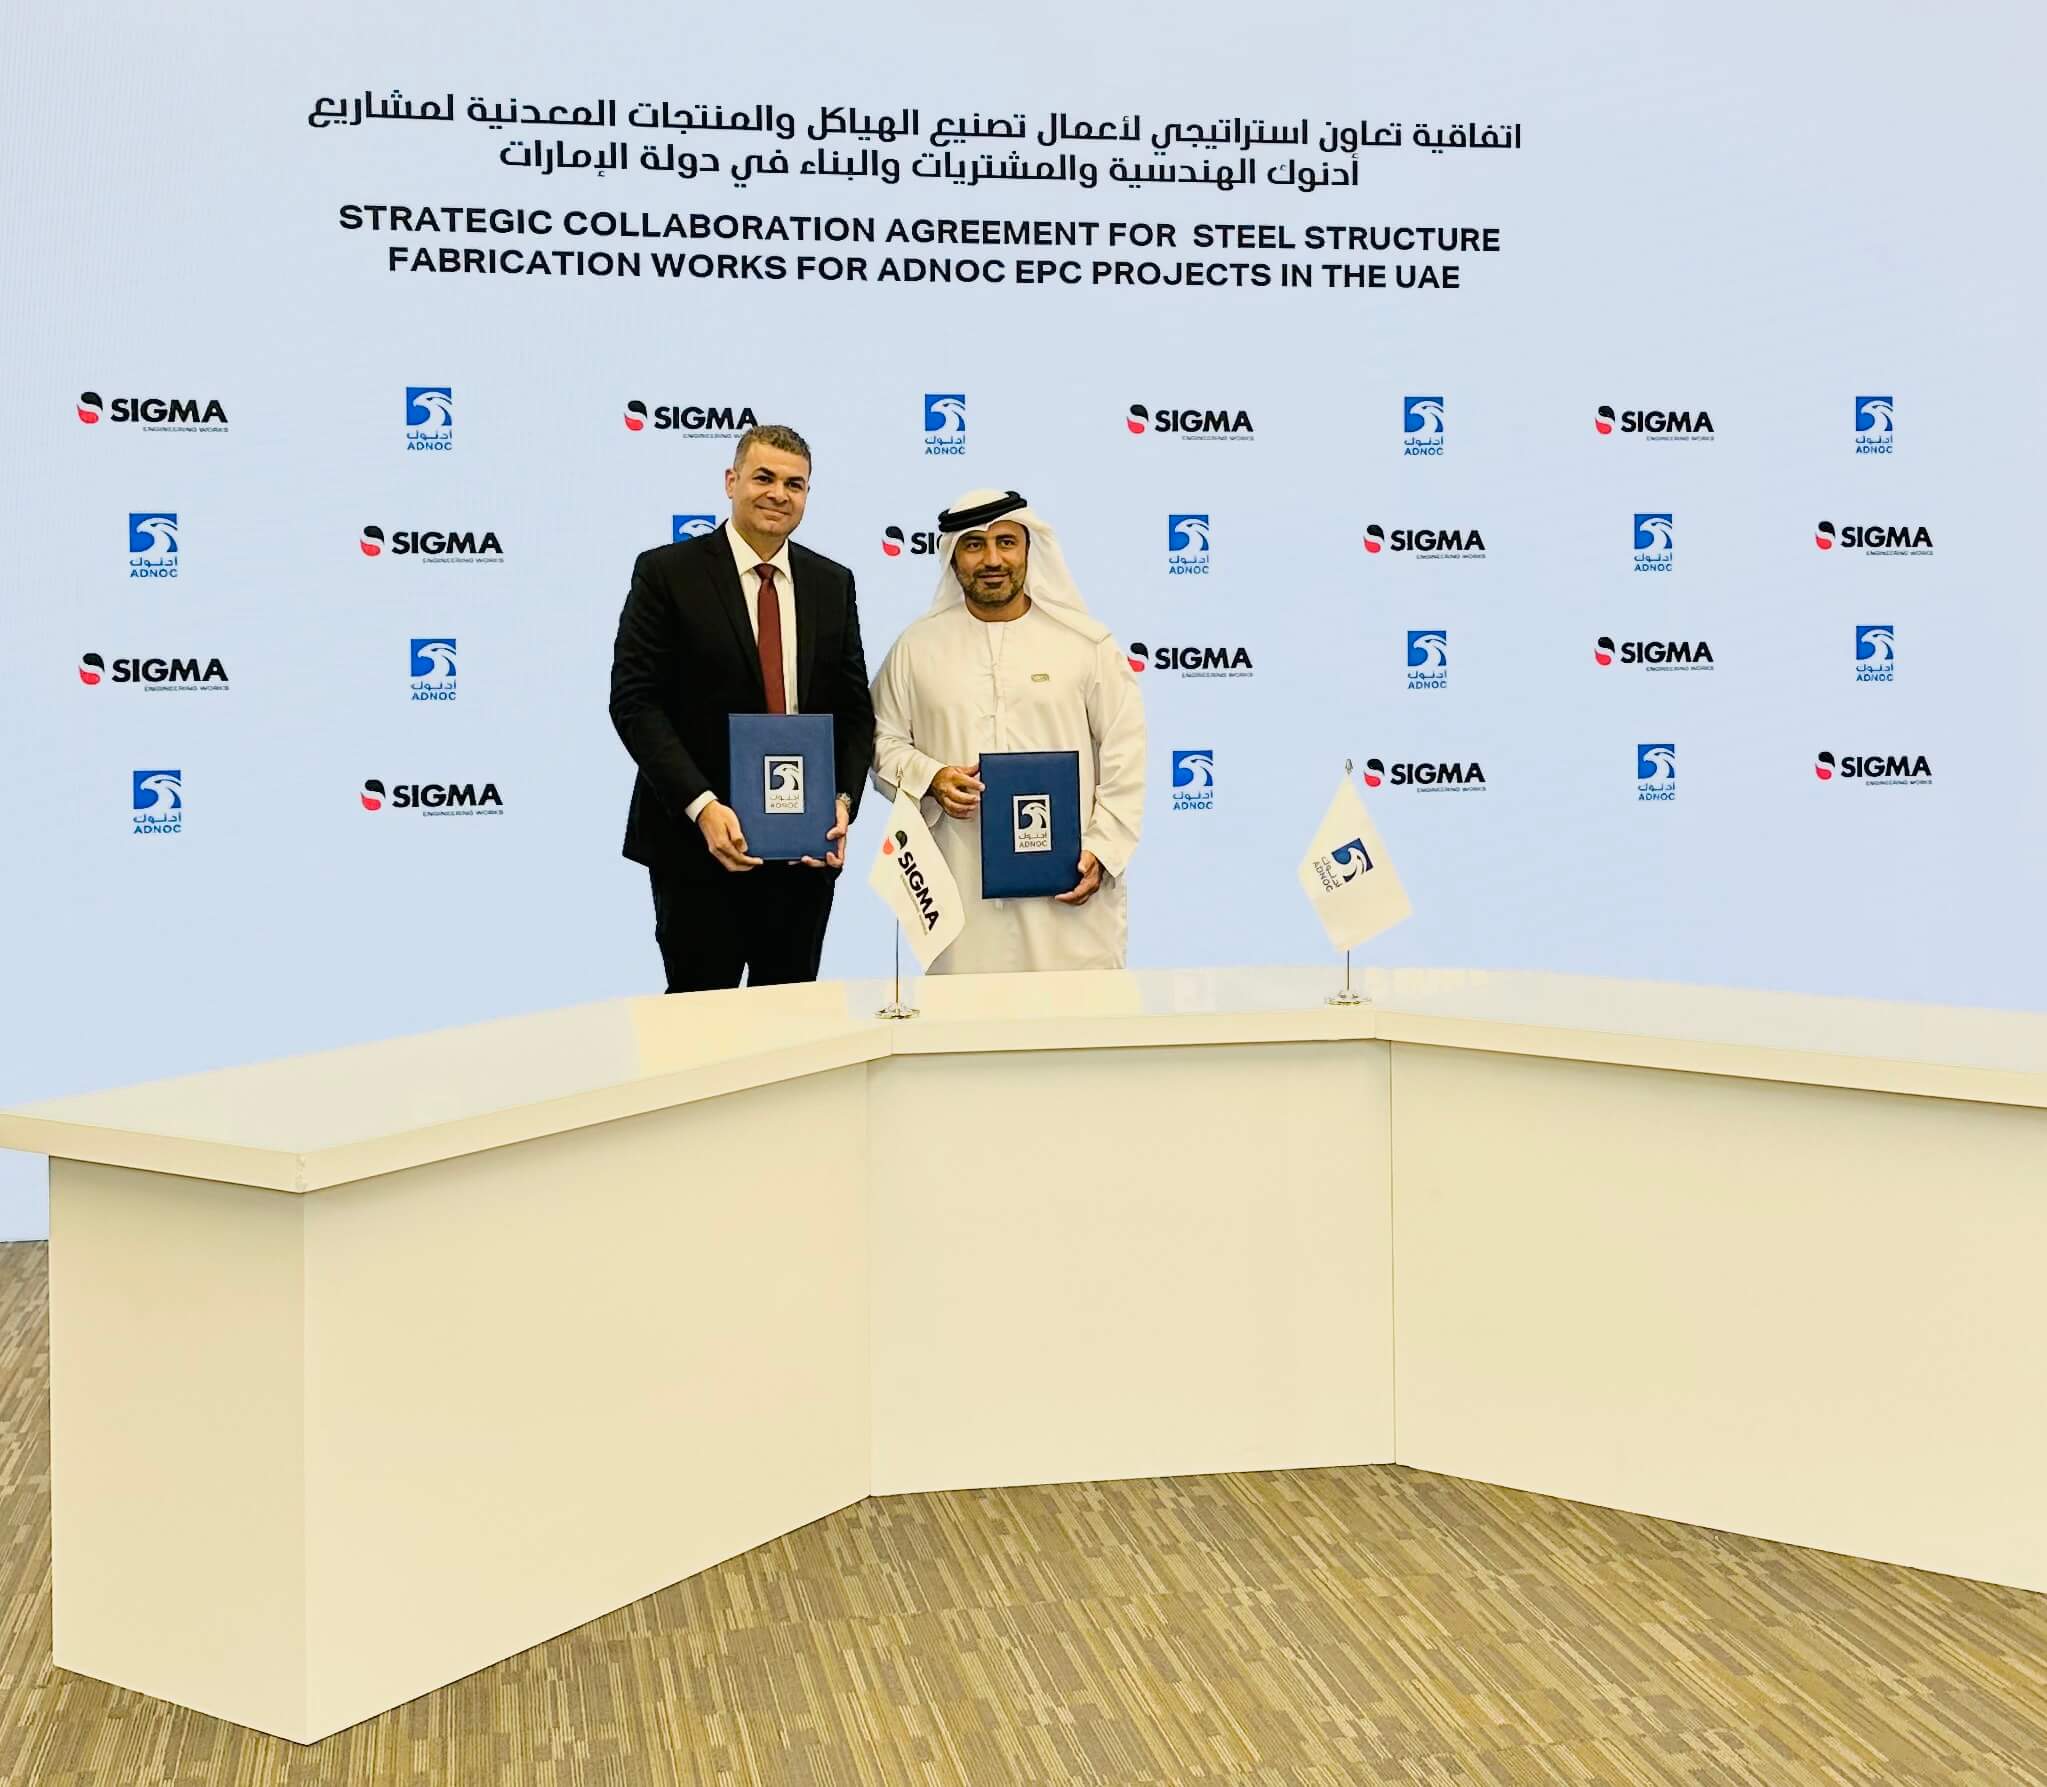 Announcing Strategic Collaboration Agreement: Sigma Engineering Works Joins Forces with ADNOC for Steel Fabrication in UAE